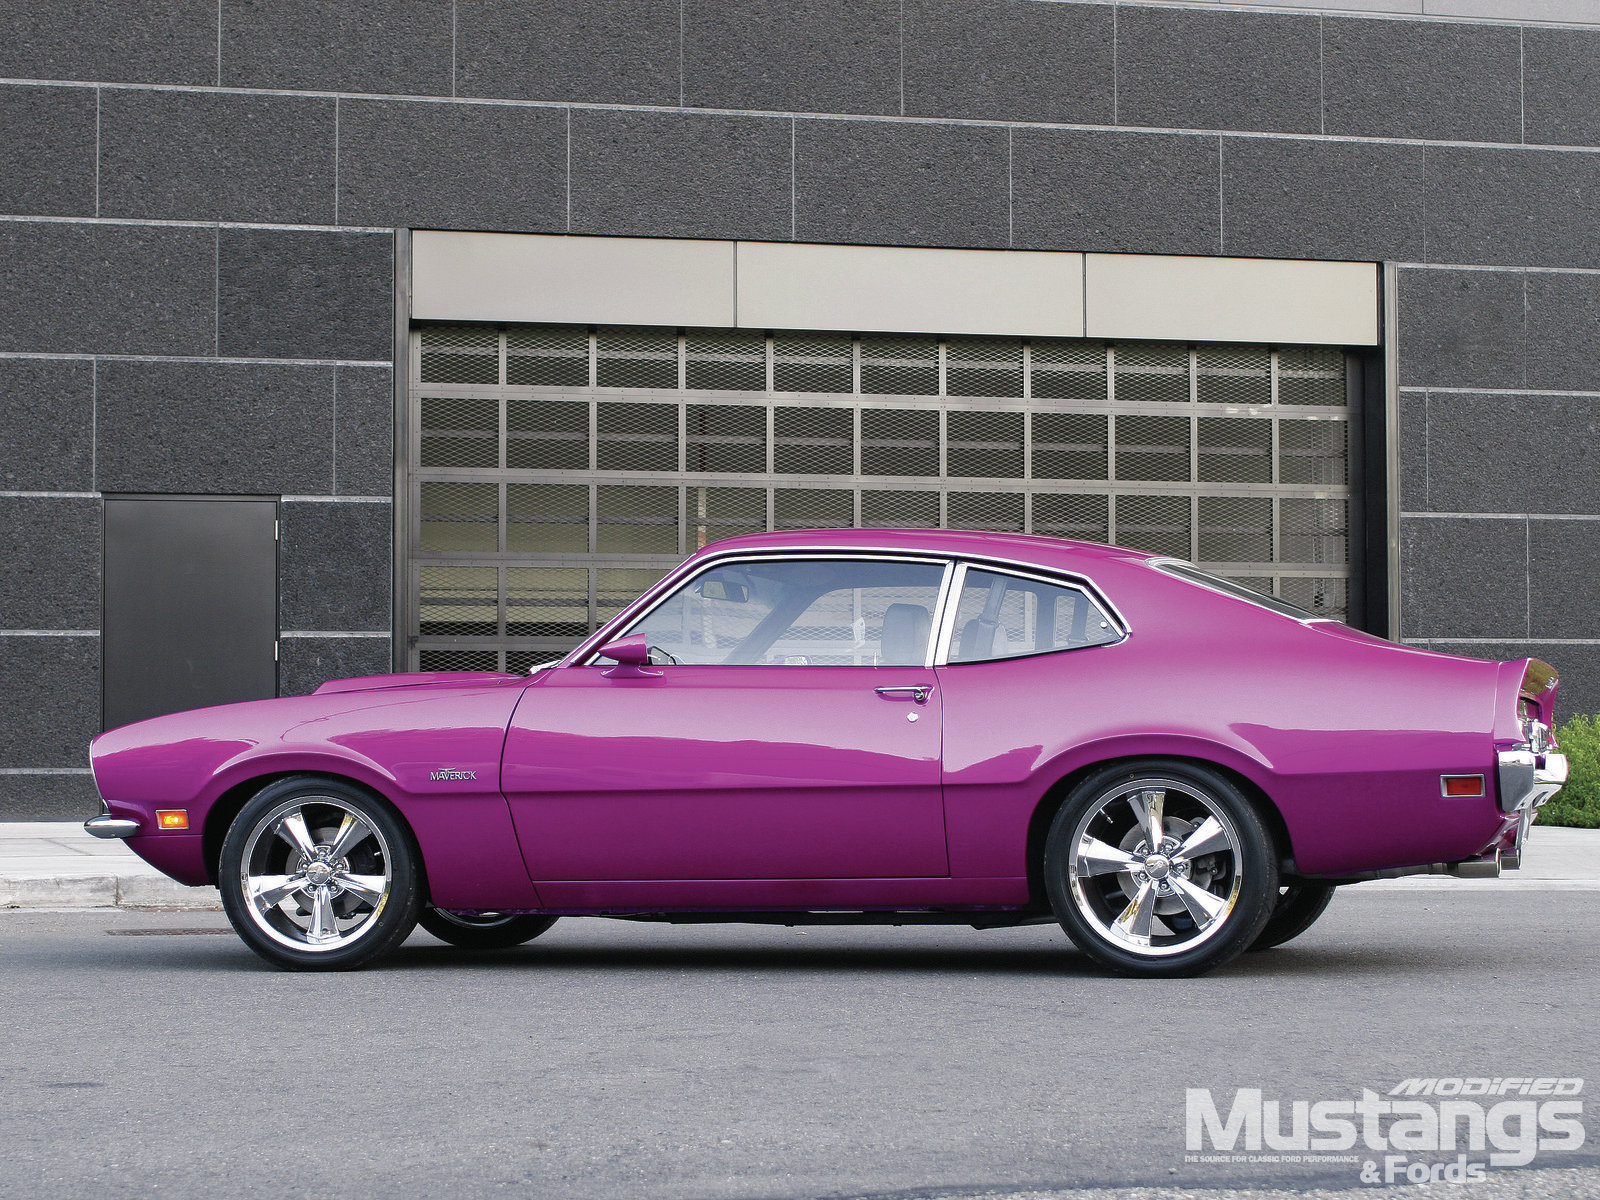 ford, Maverick, Muscle, Classic, Hot, Rod, Rods Wallpaper